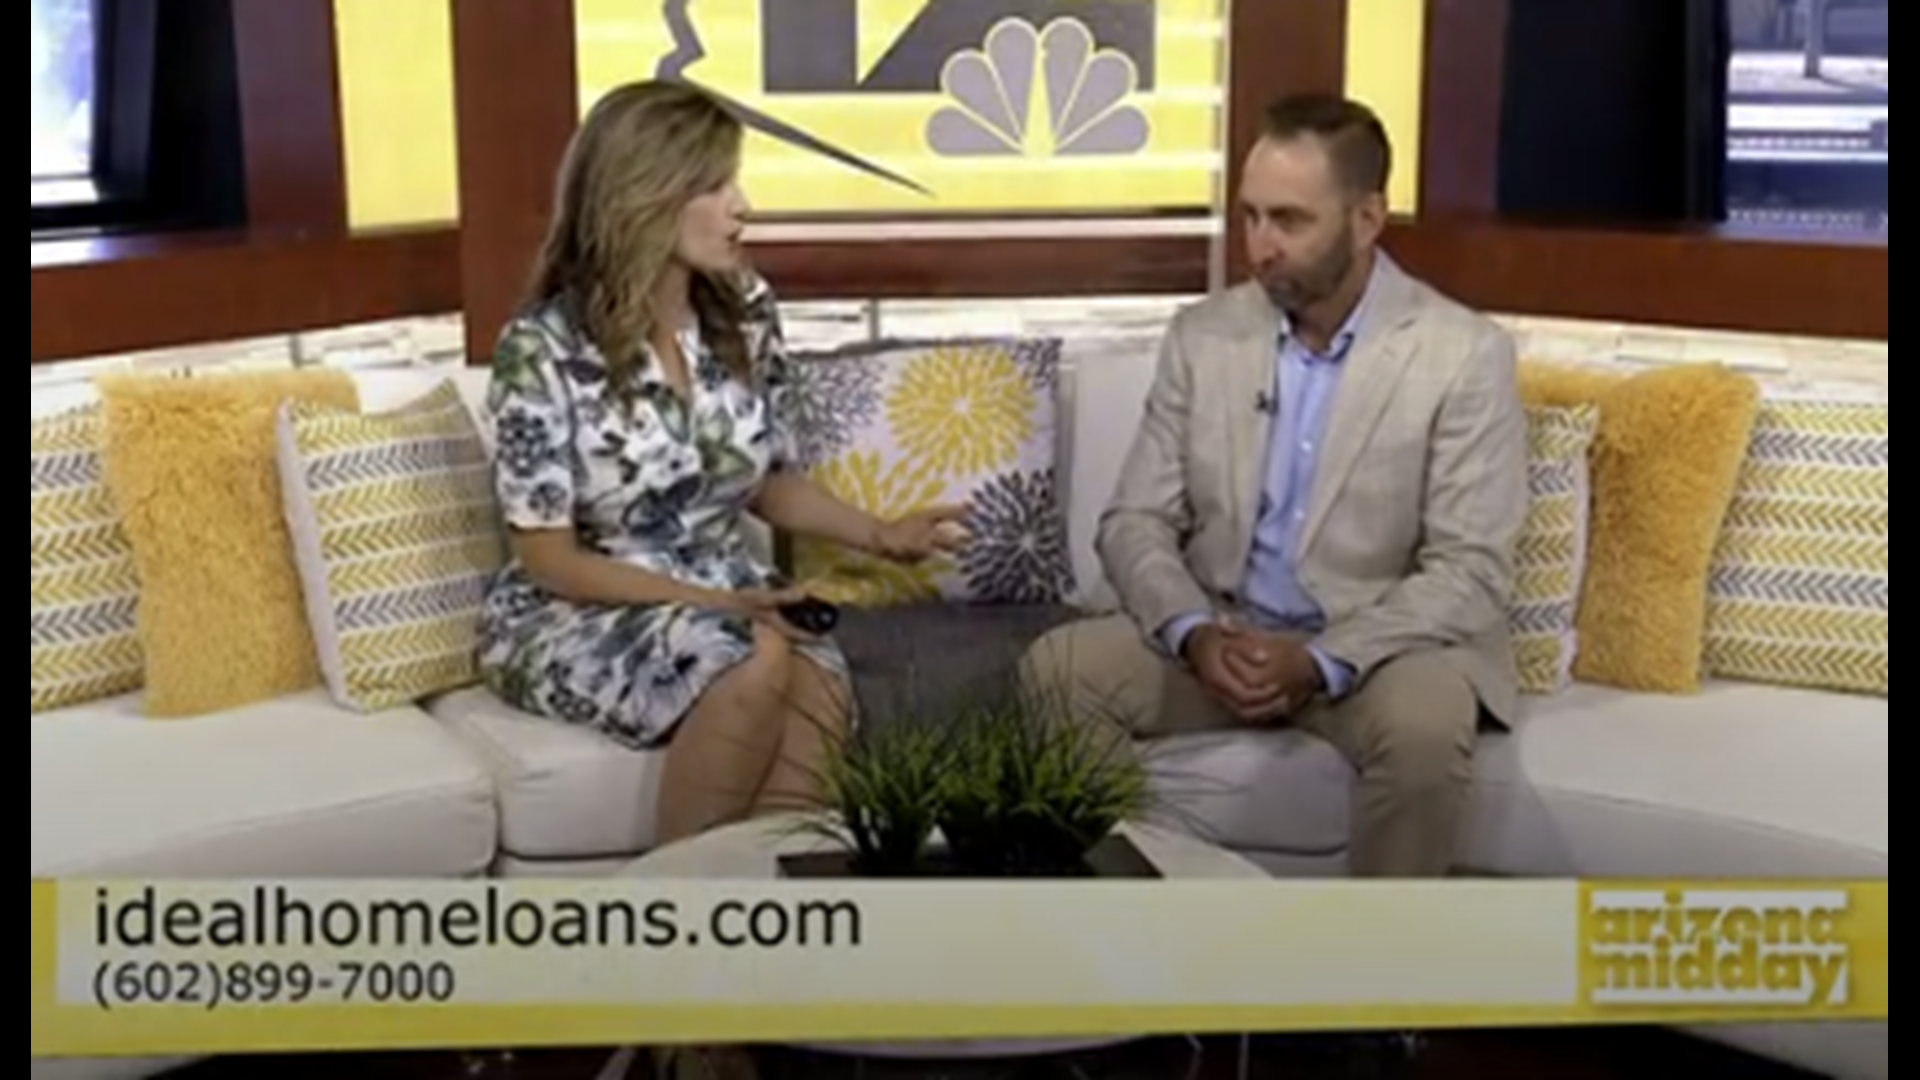 Owner of Ideal Home Loans, Brent Ivinson tells us what it's like to work with lending specialists and how they are here to help you.